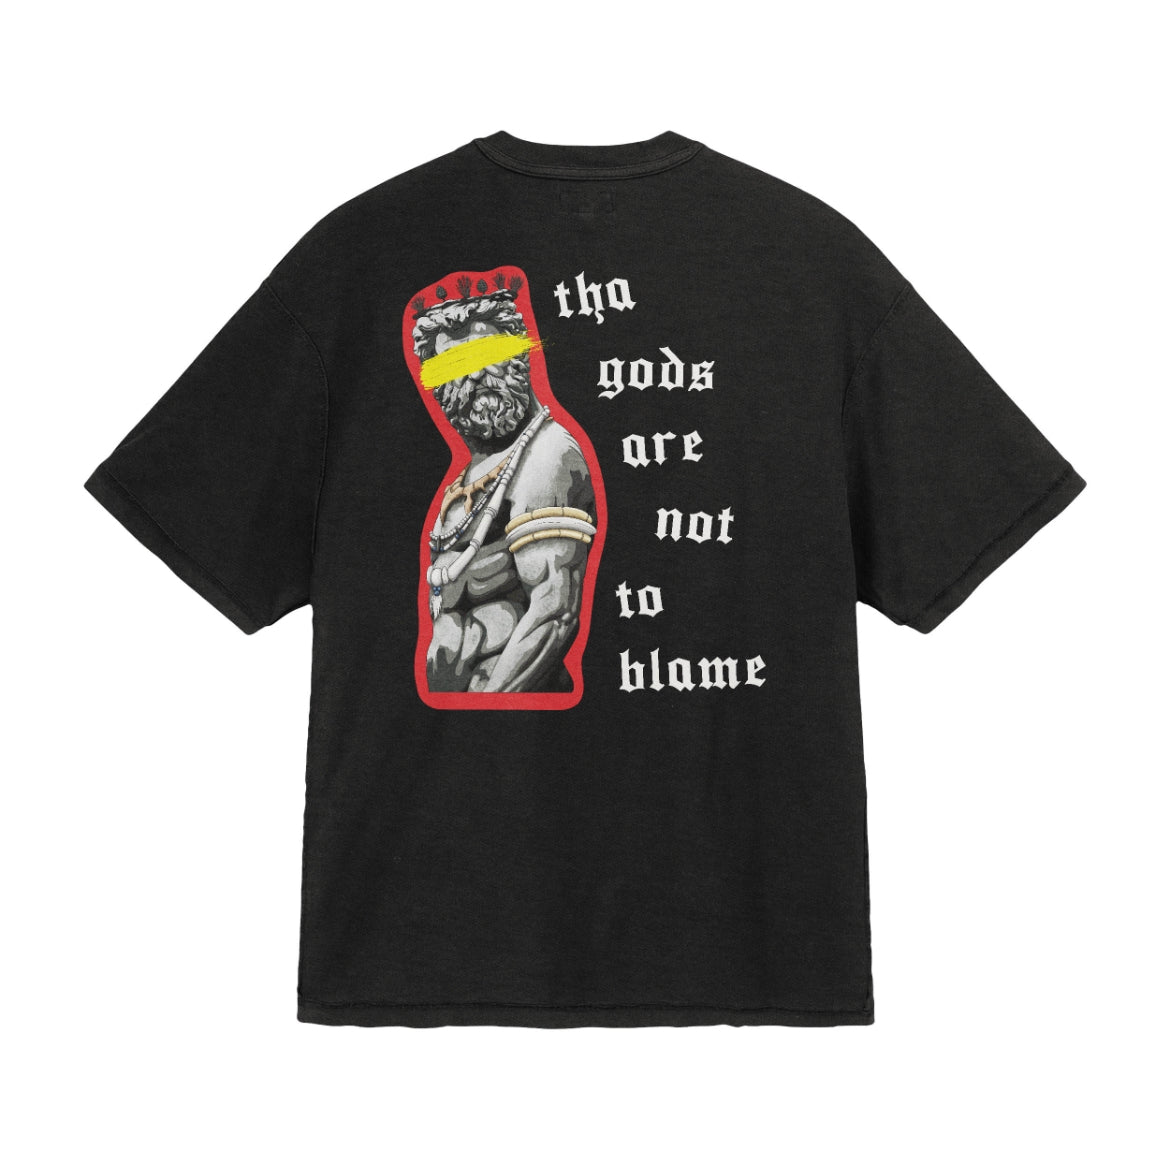 “Tha gods are not to blame” oversized fit T-shirt